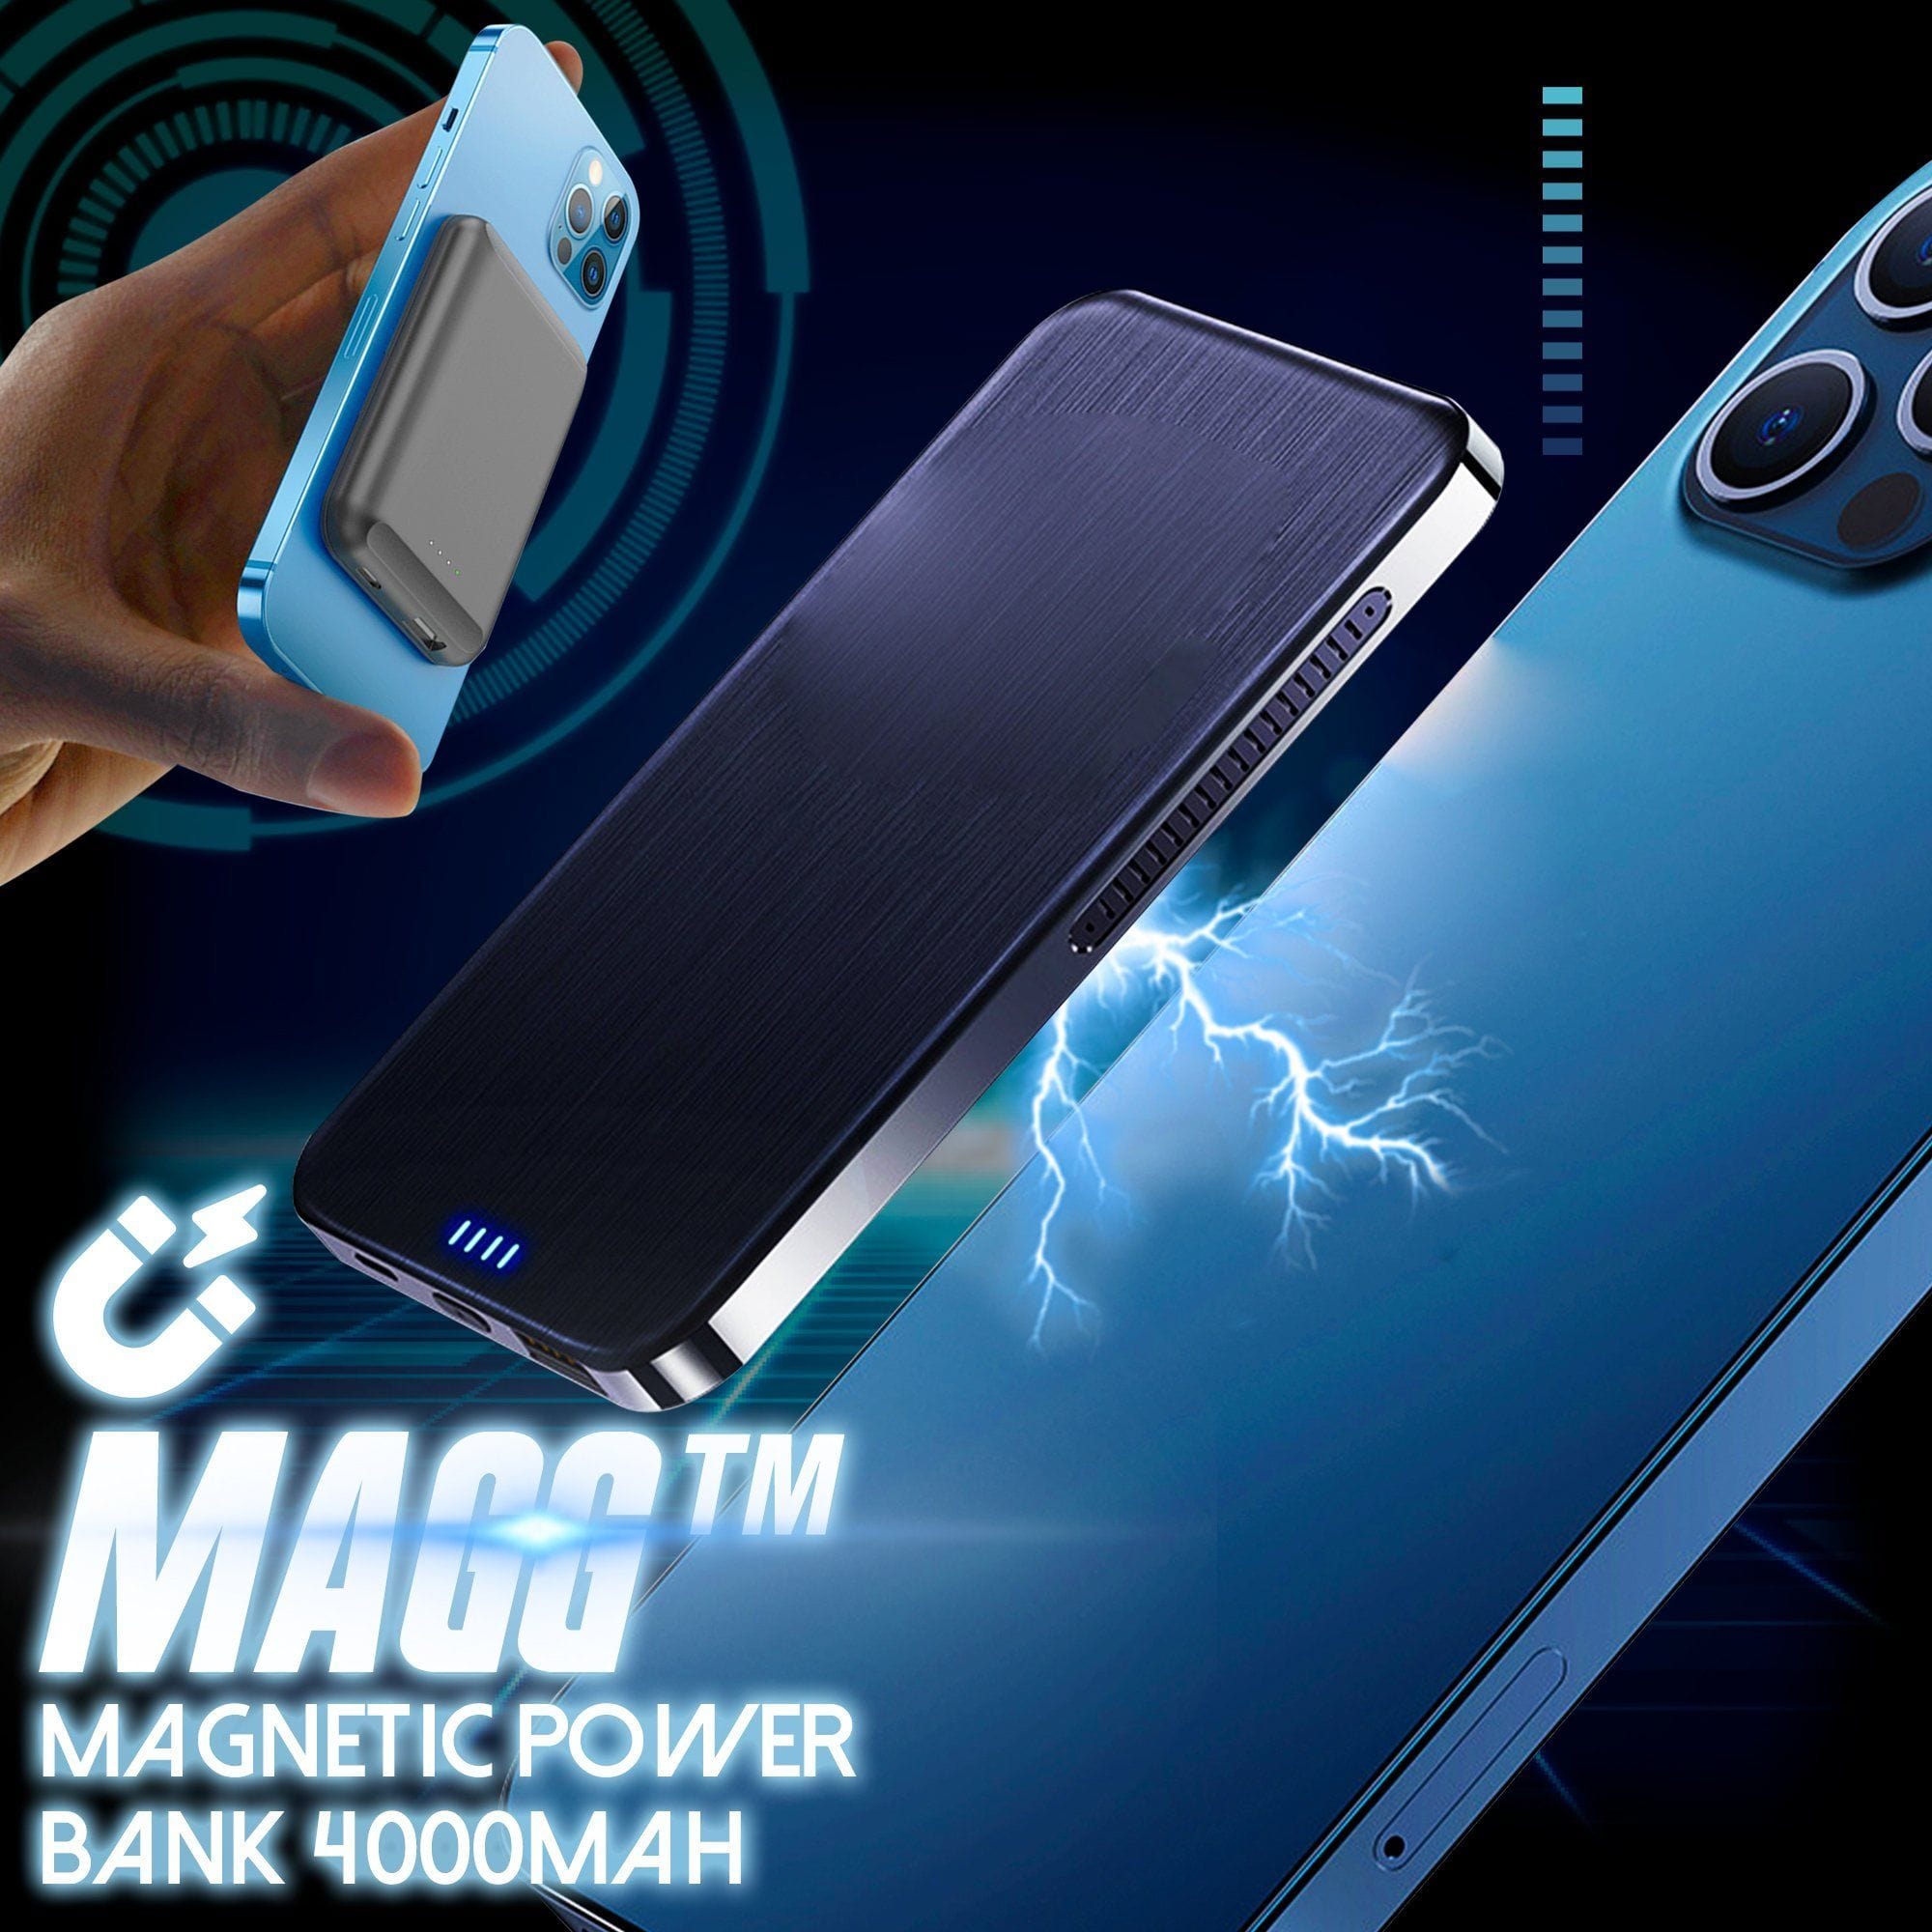 MAGG Wireless Magnetic Power Bank 4000 мАч